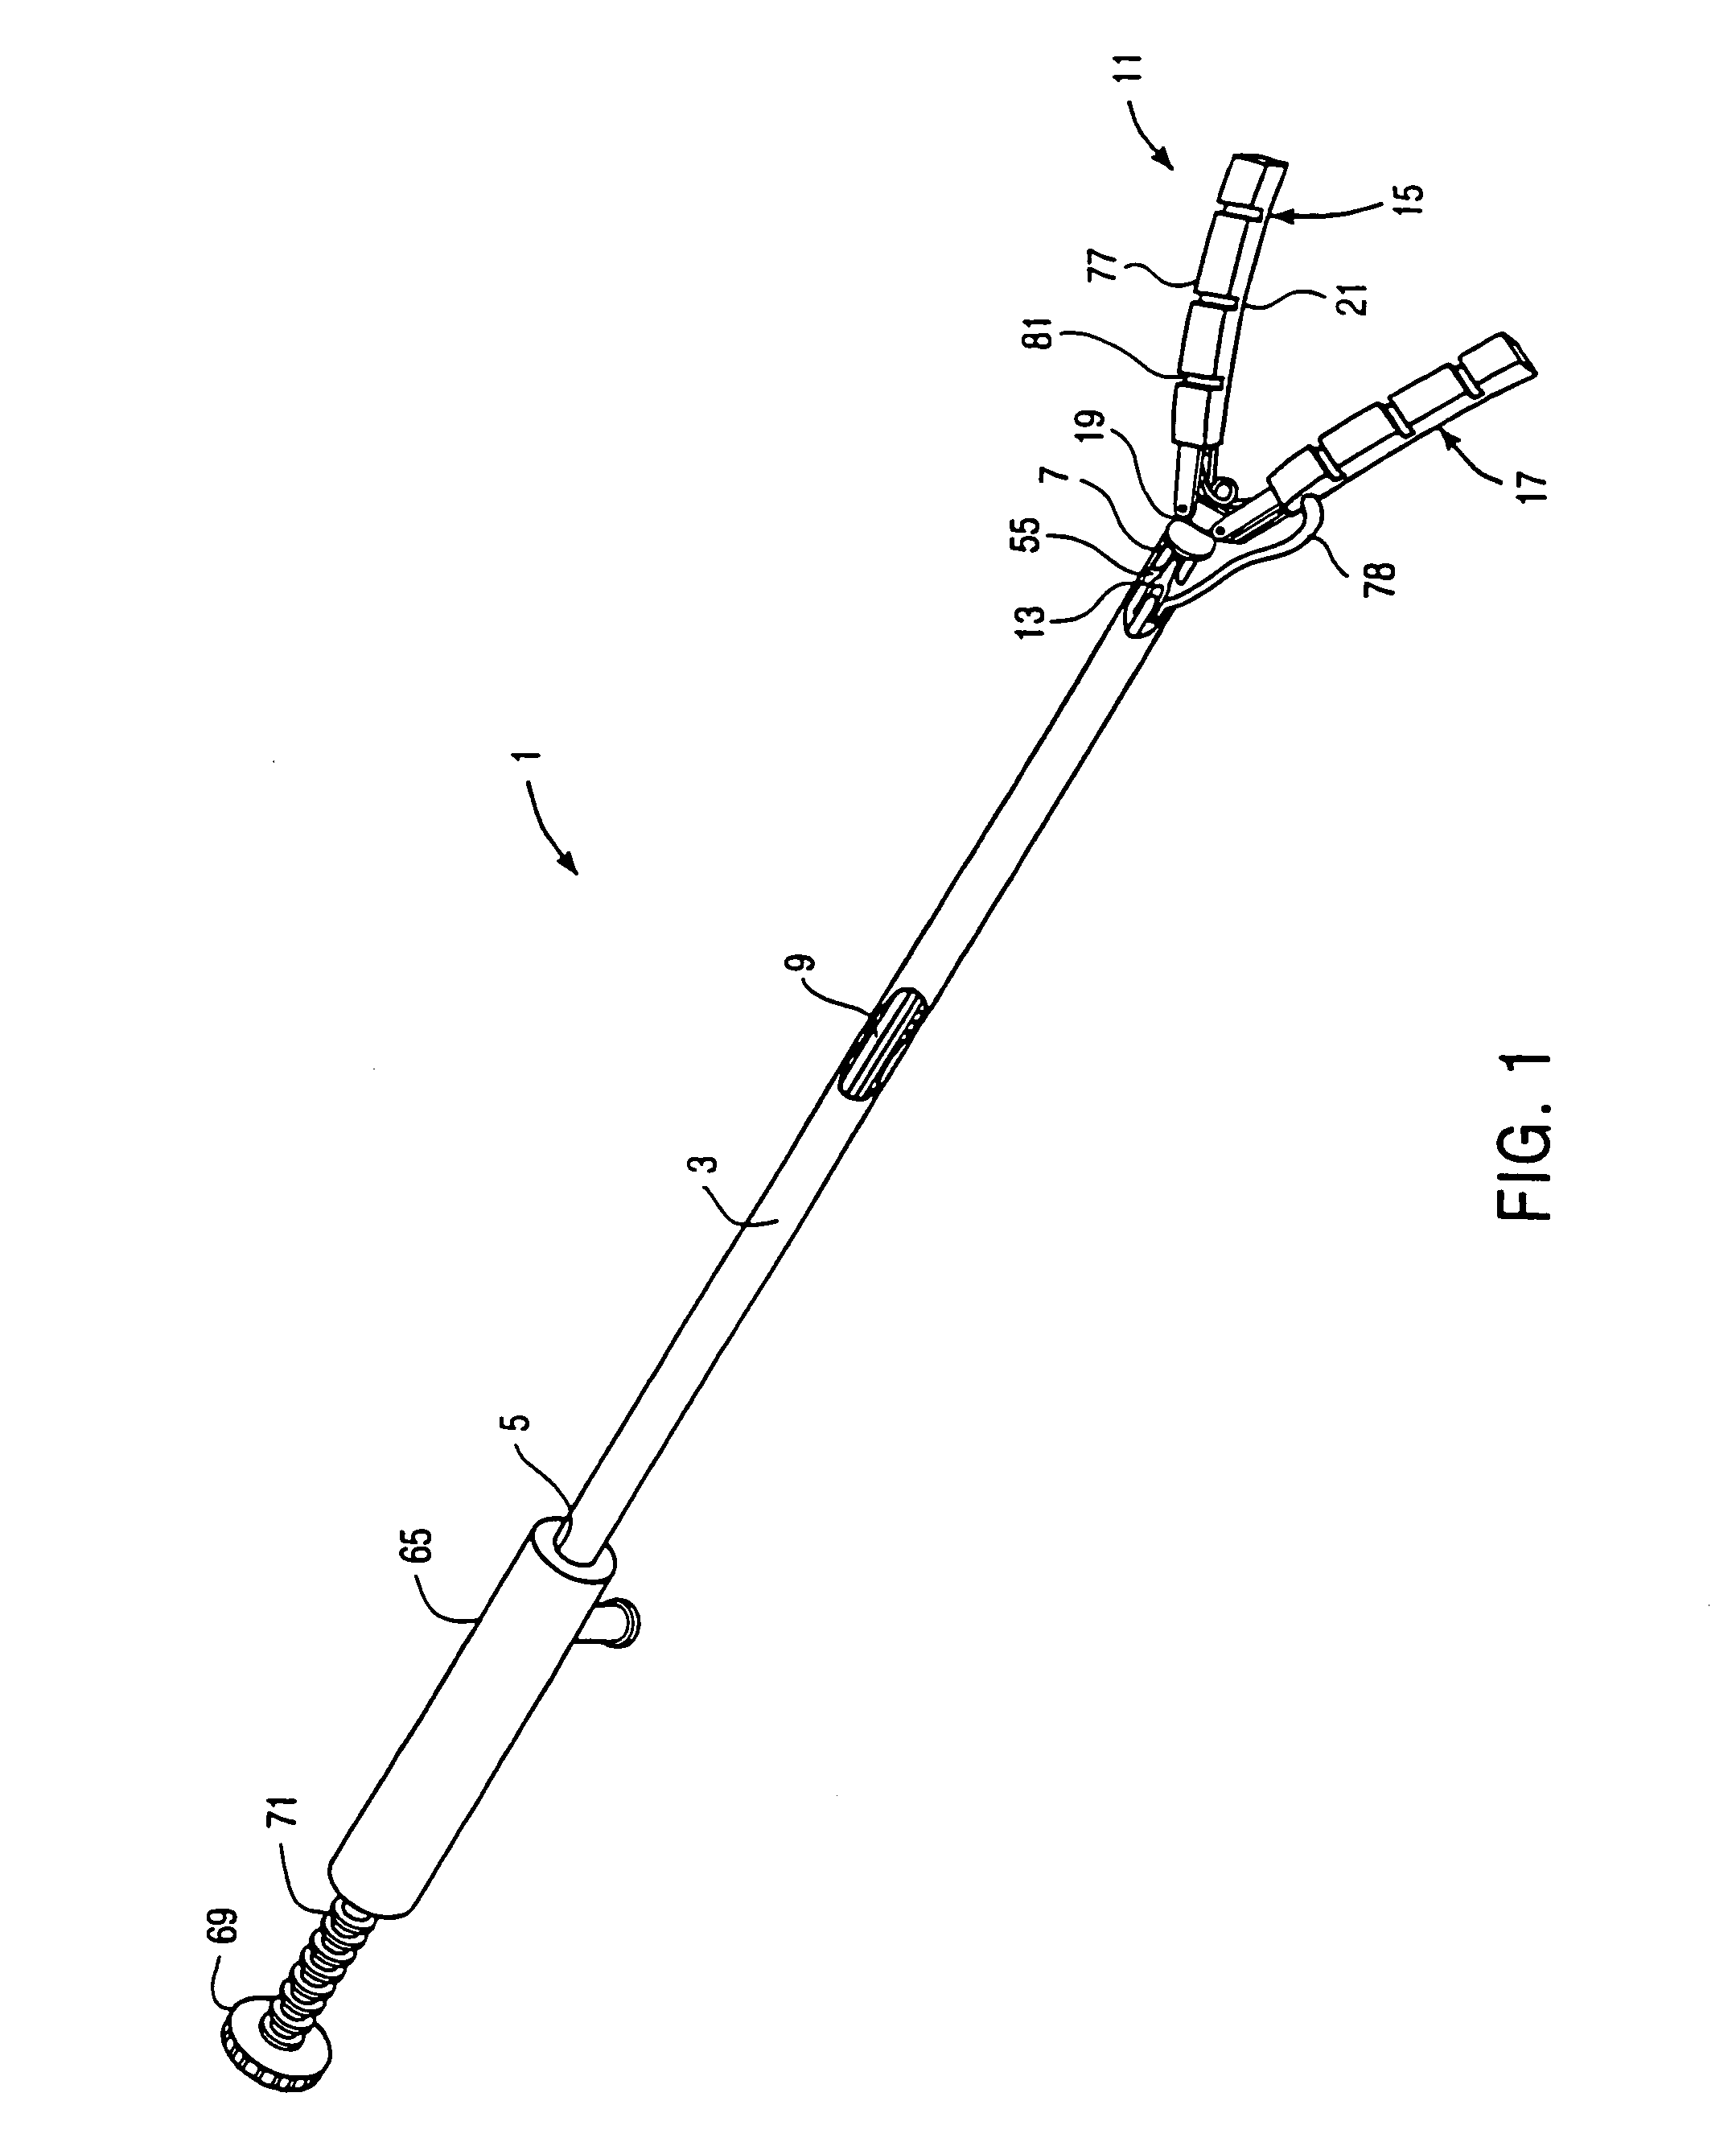 Device and method for isolating a surgical site